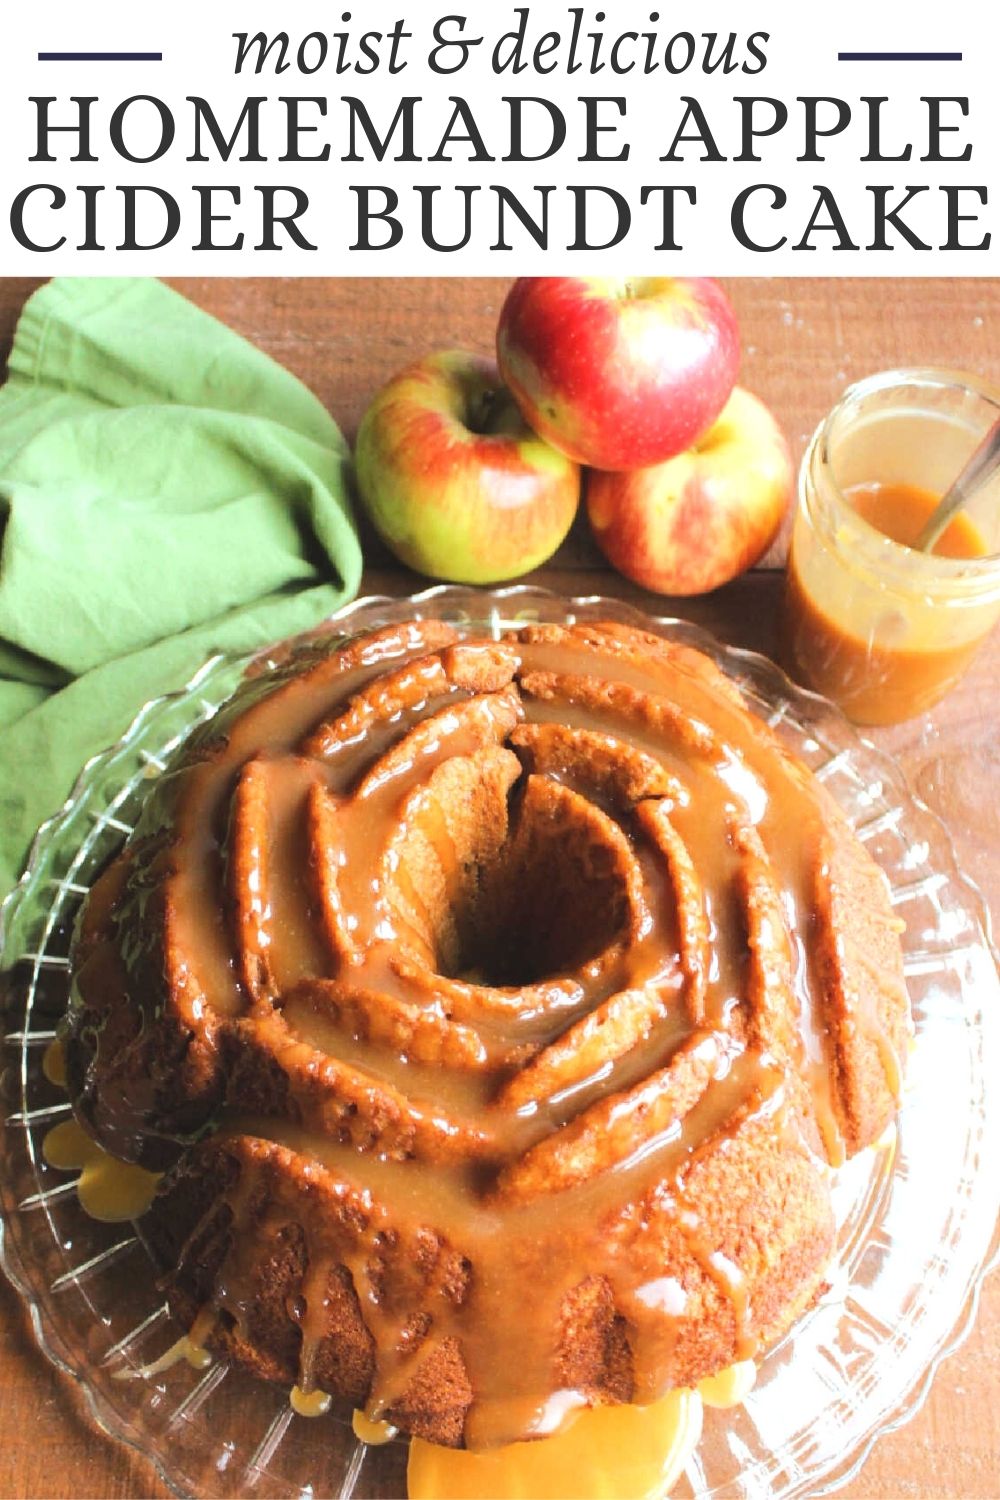 This homemade apple Bundt cake has both apple cider and apple butter baked inside for big fruit flavor. The cinnamon and nutmeg round it out for the perfect autumnal dessert.